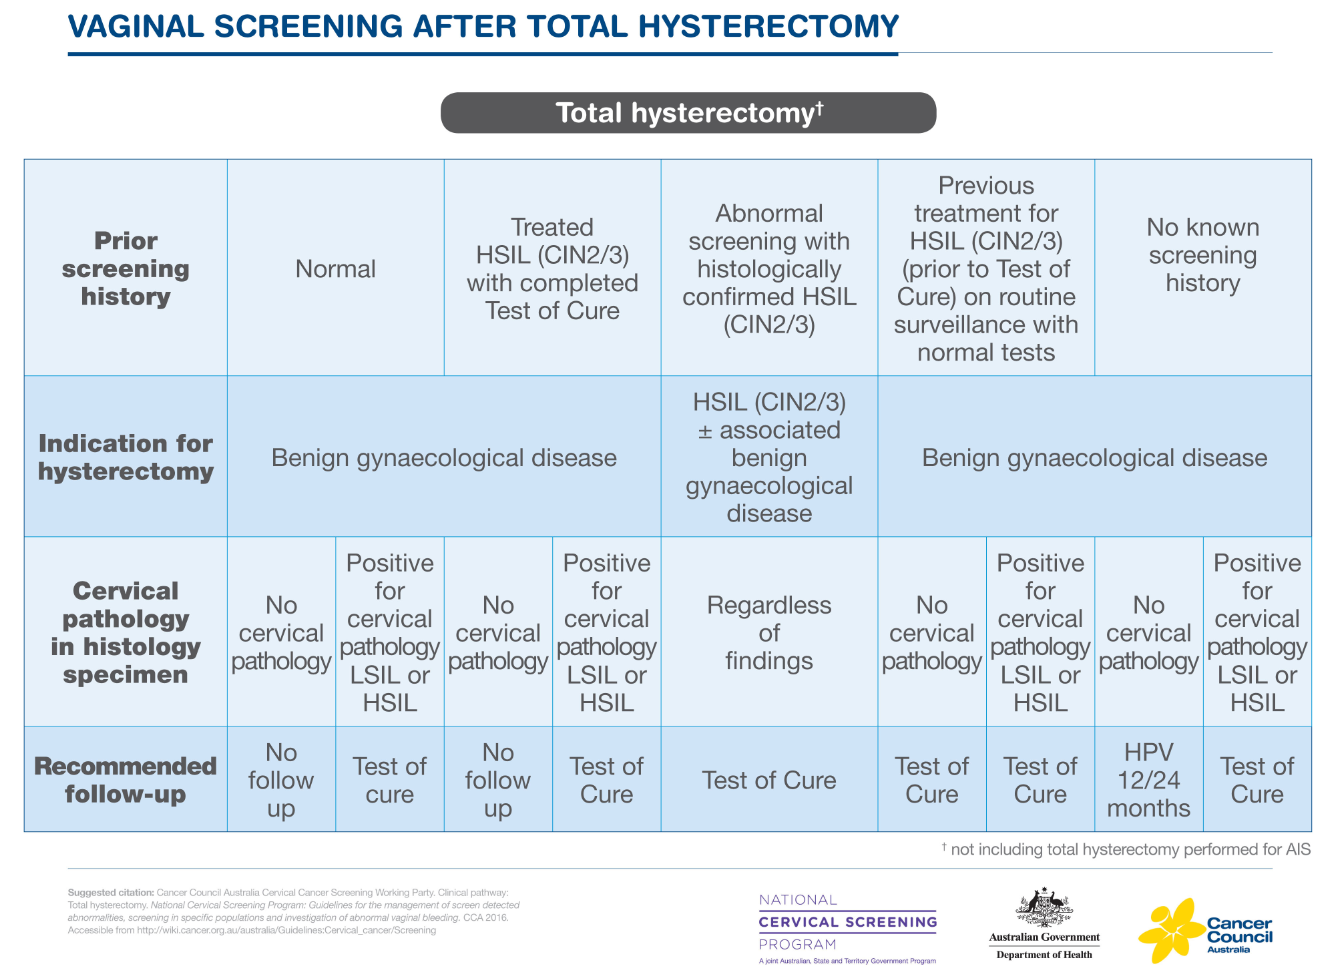 Vaginal screening after total hysterectomy - Table 1